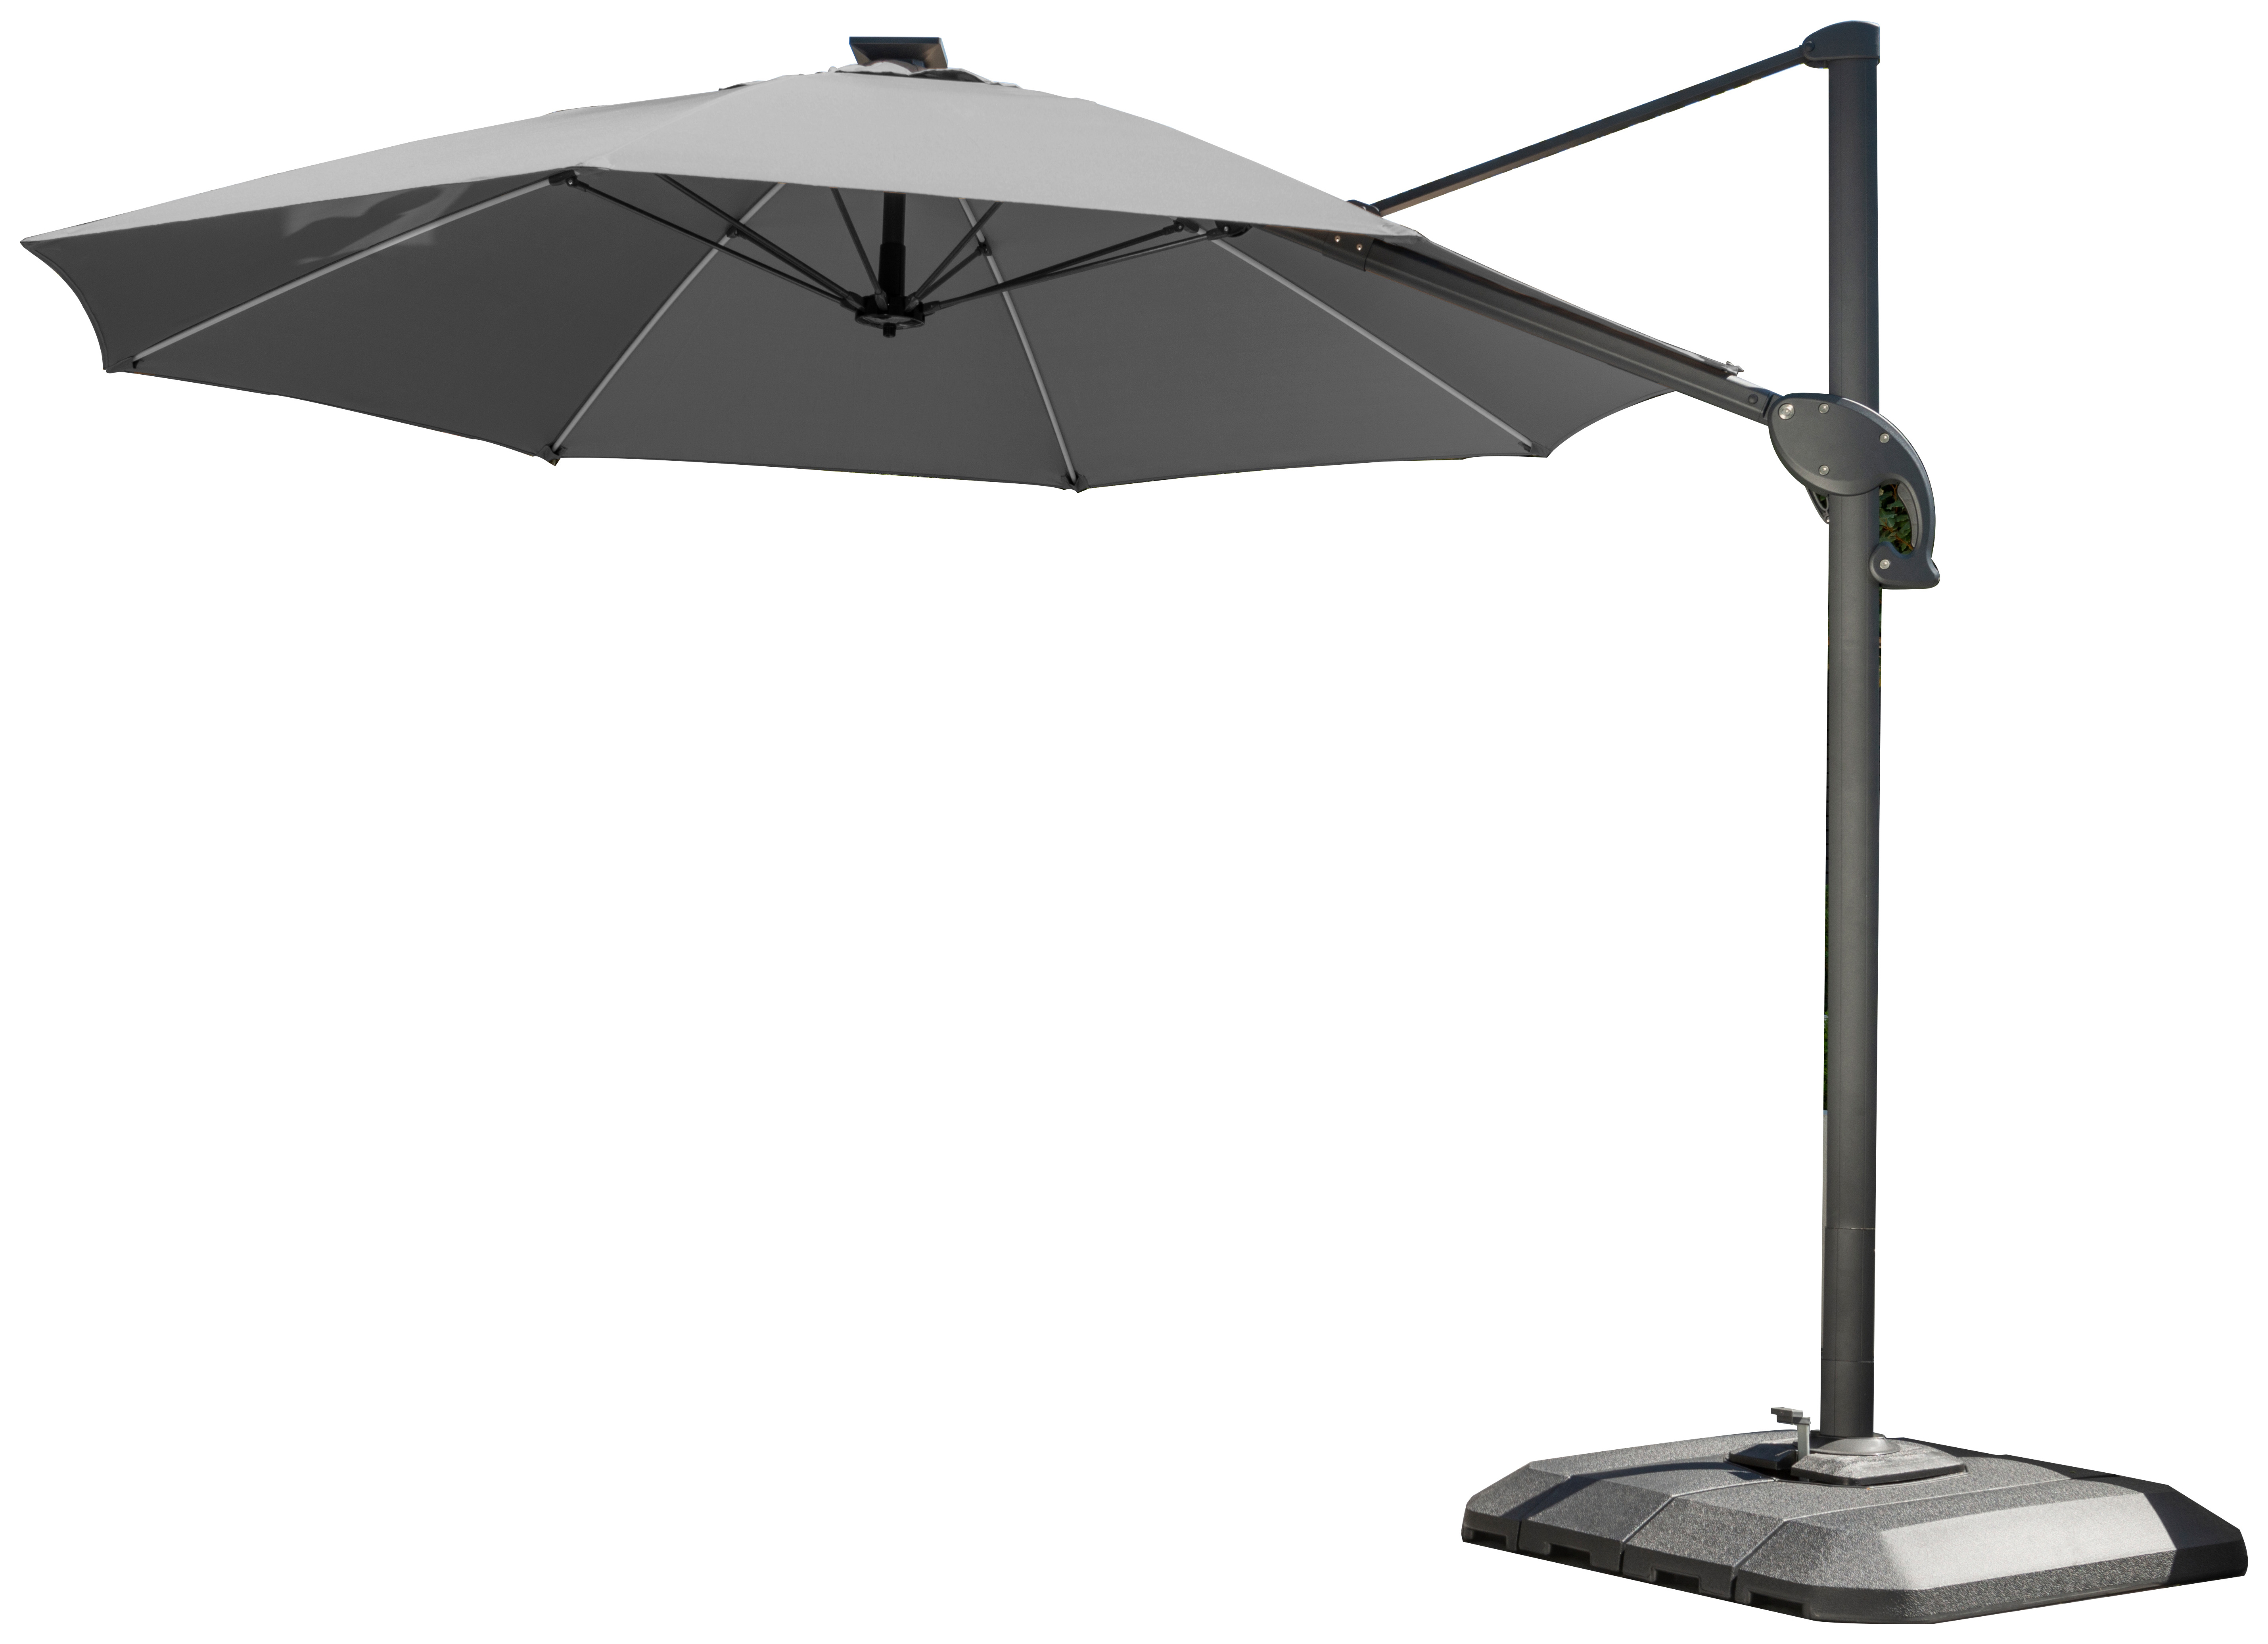 Image of Norfolk Leisure One Box Grey Parasol 3m Round LED Cantilever with Water Filled Base